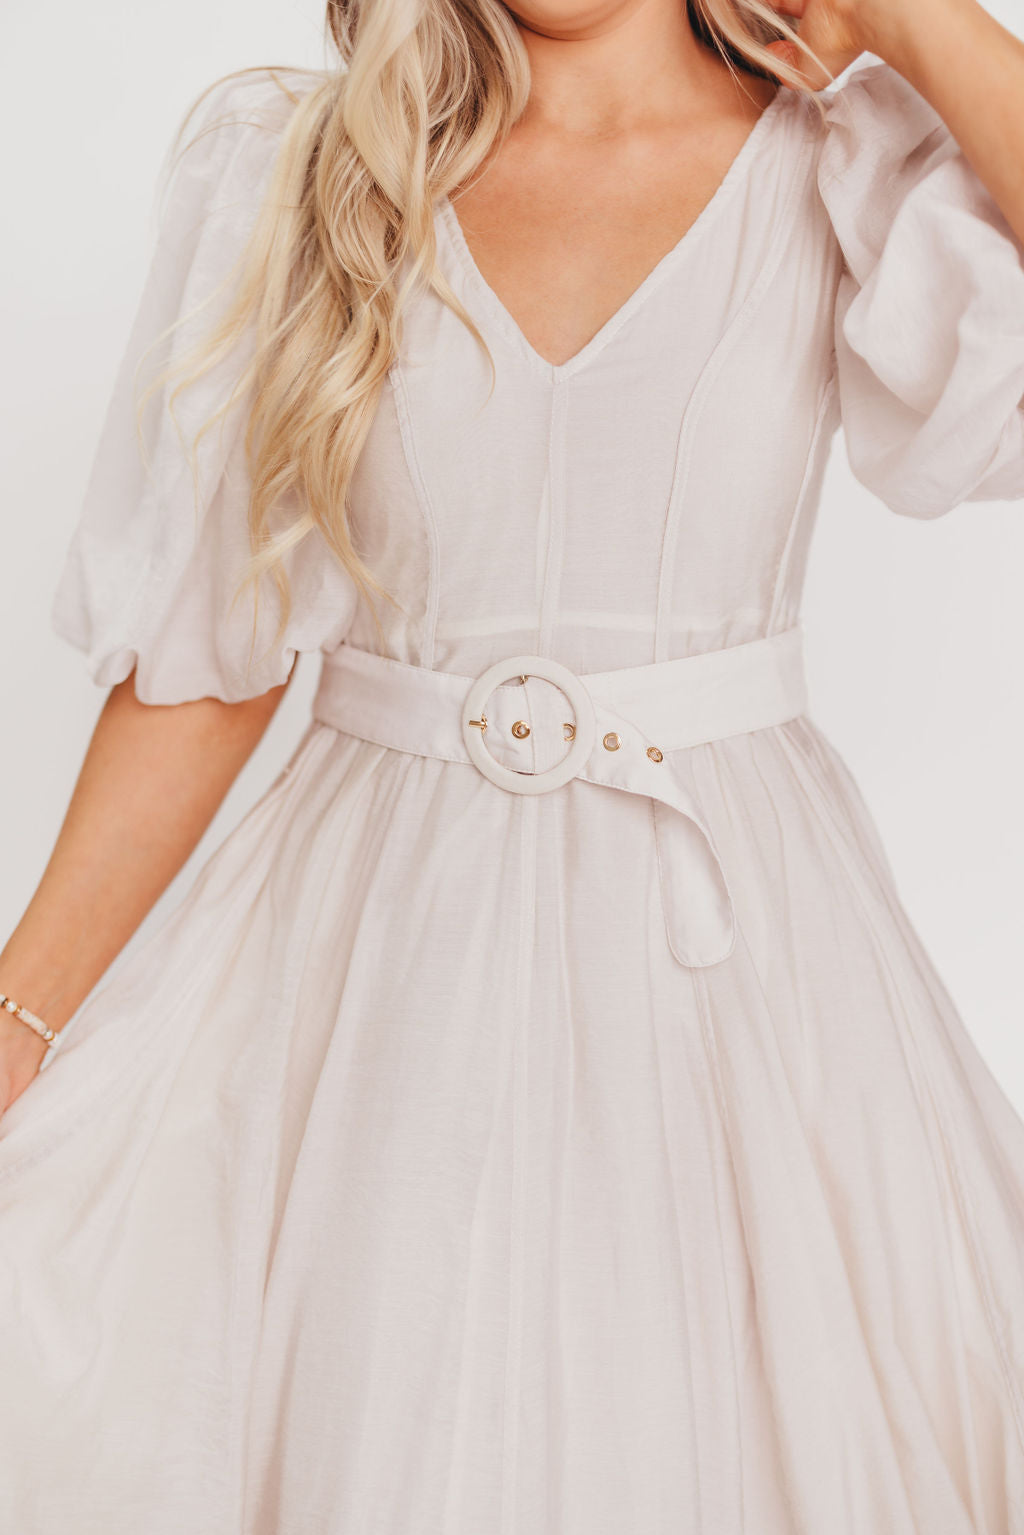 Courtney Puffed Sleeve Midi Dress with Belt in Natural